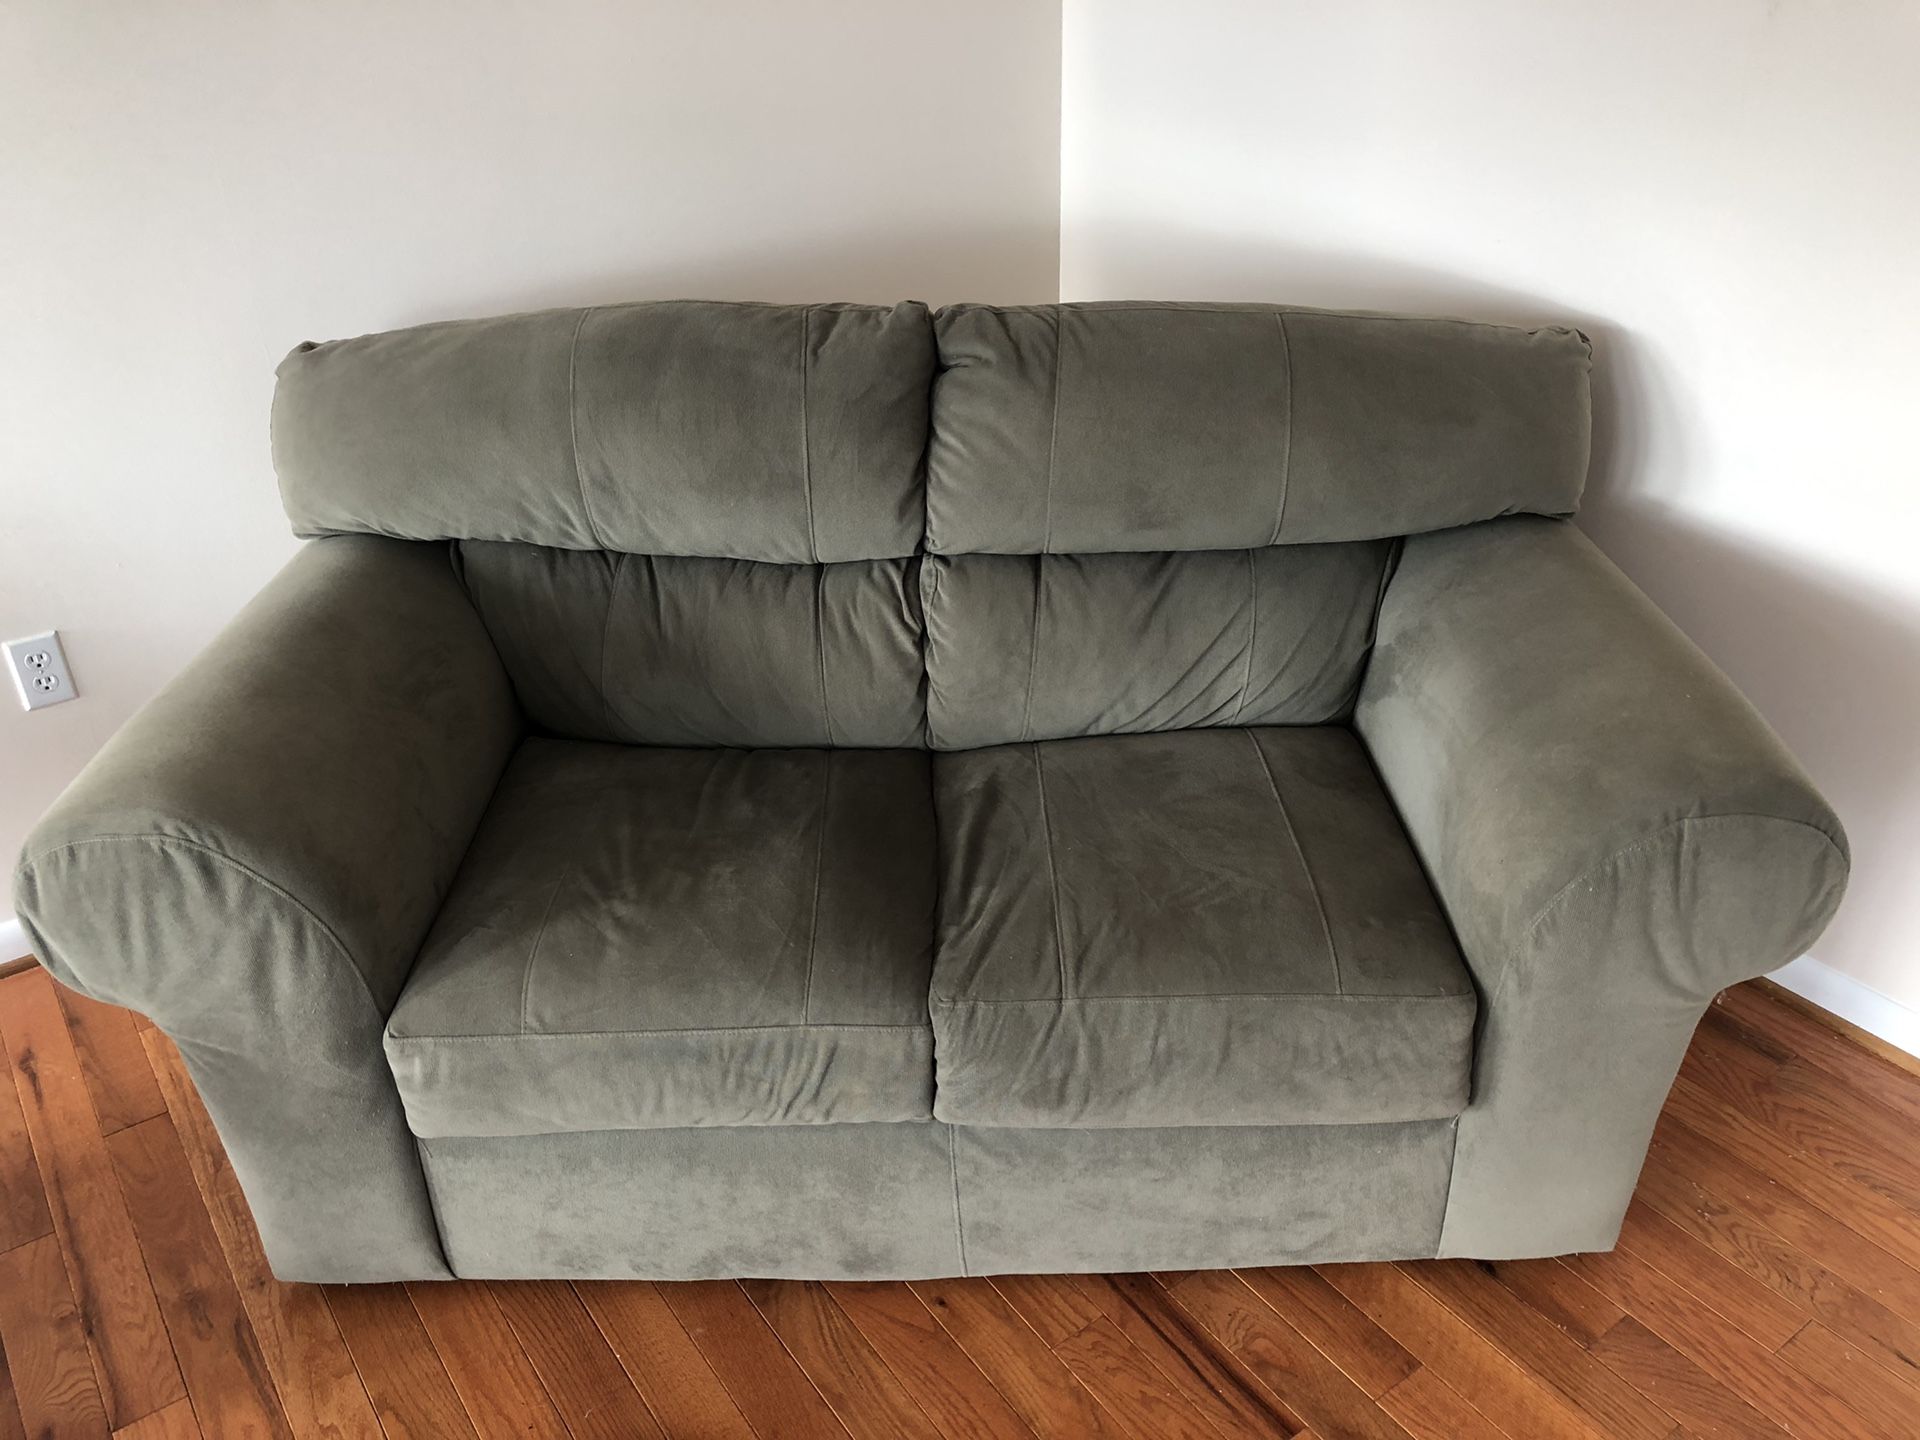 Couch, excellent shape. Rarely used and only selling as I’m downsizing.